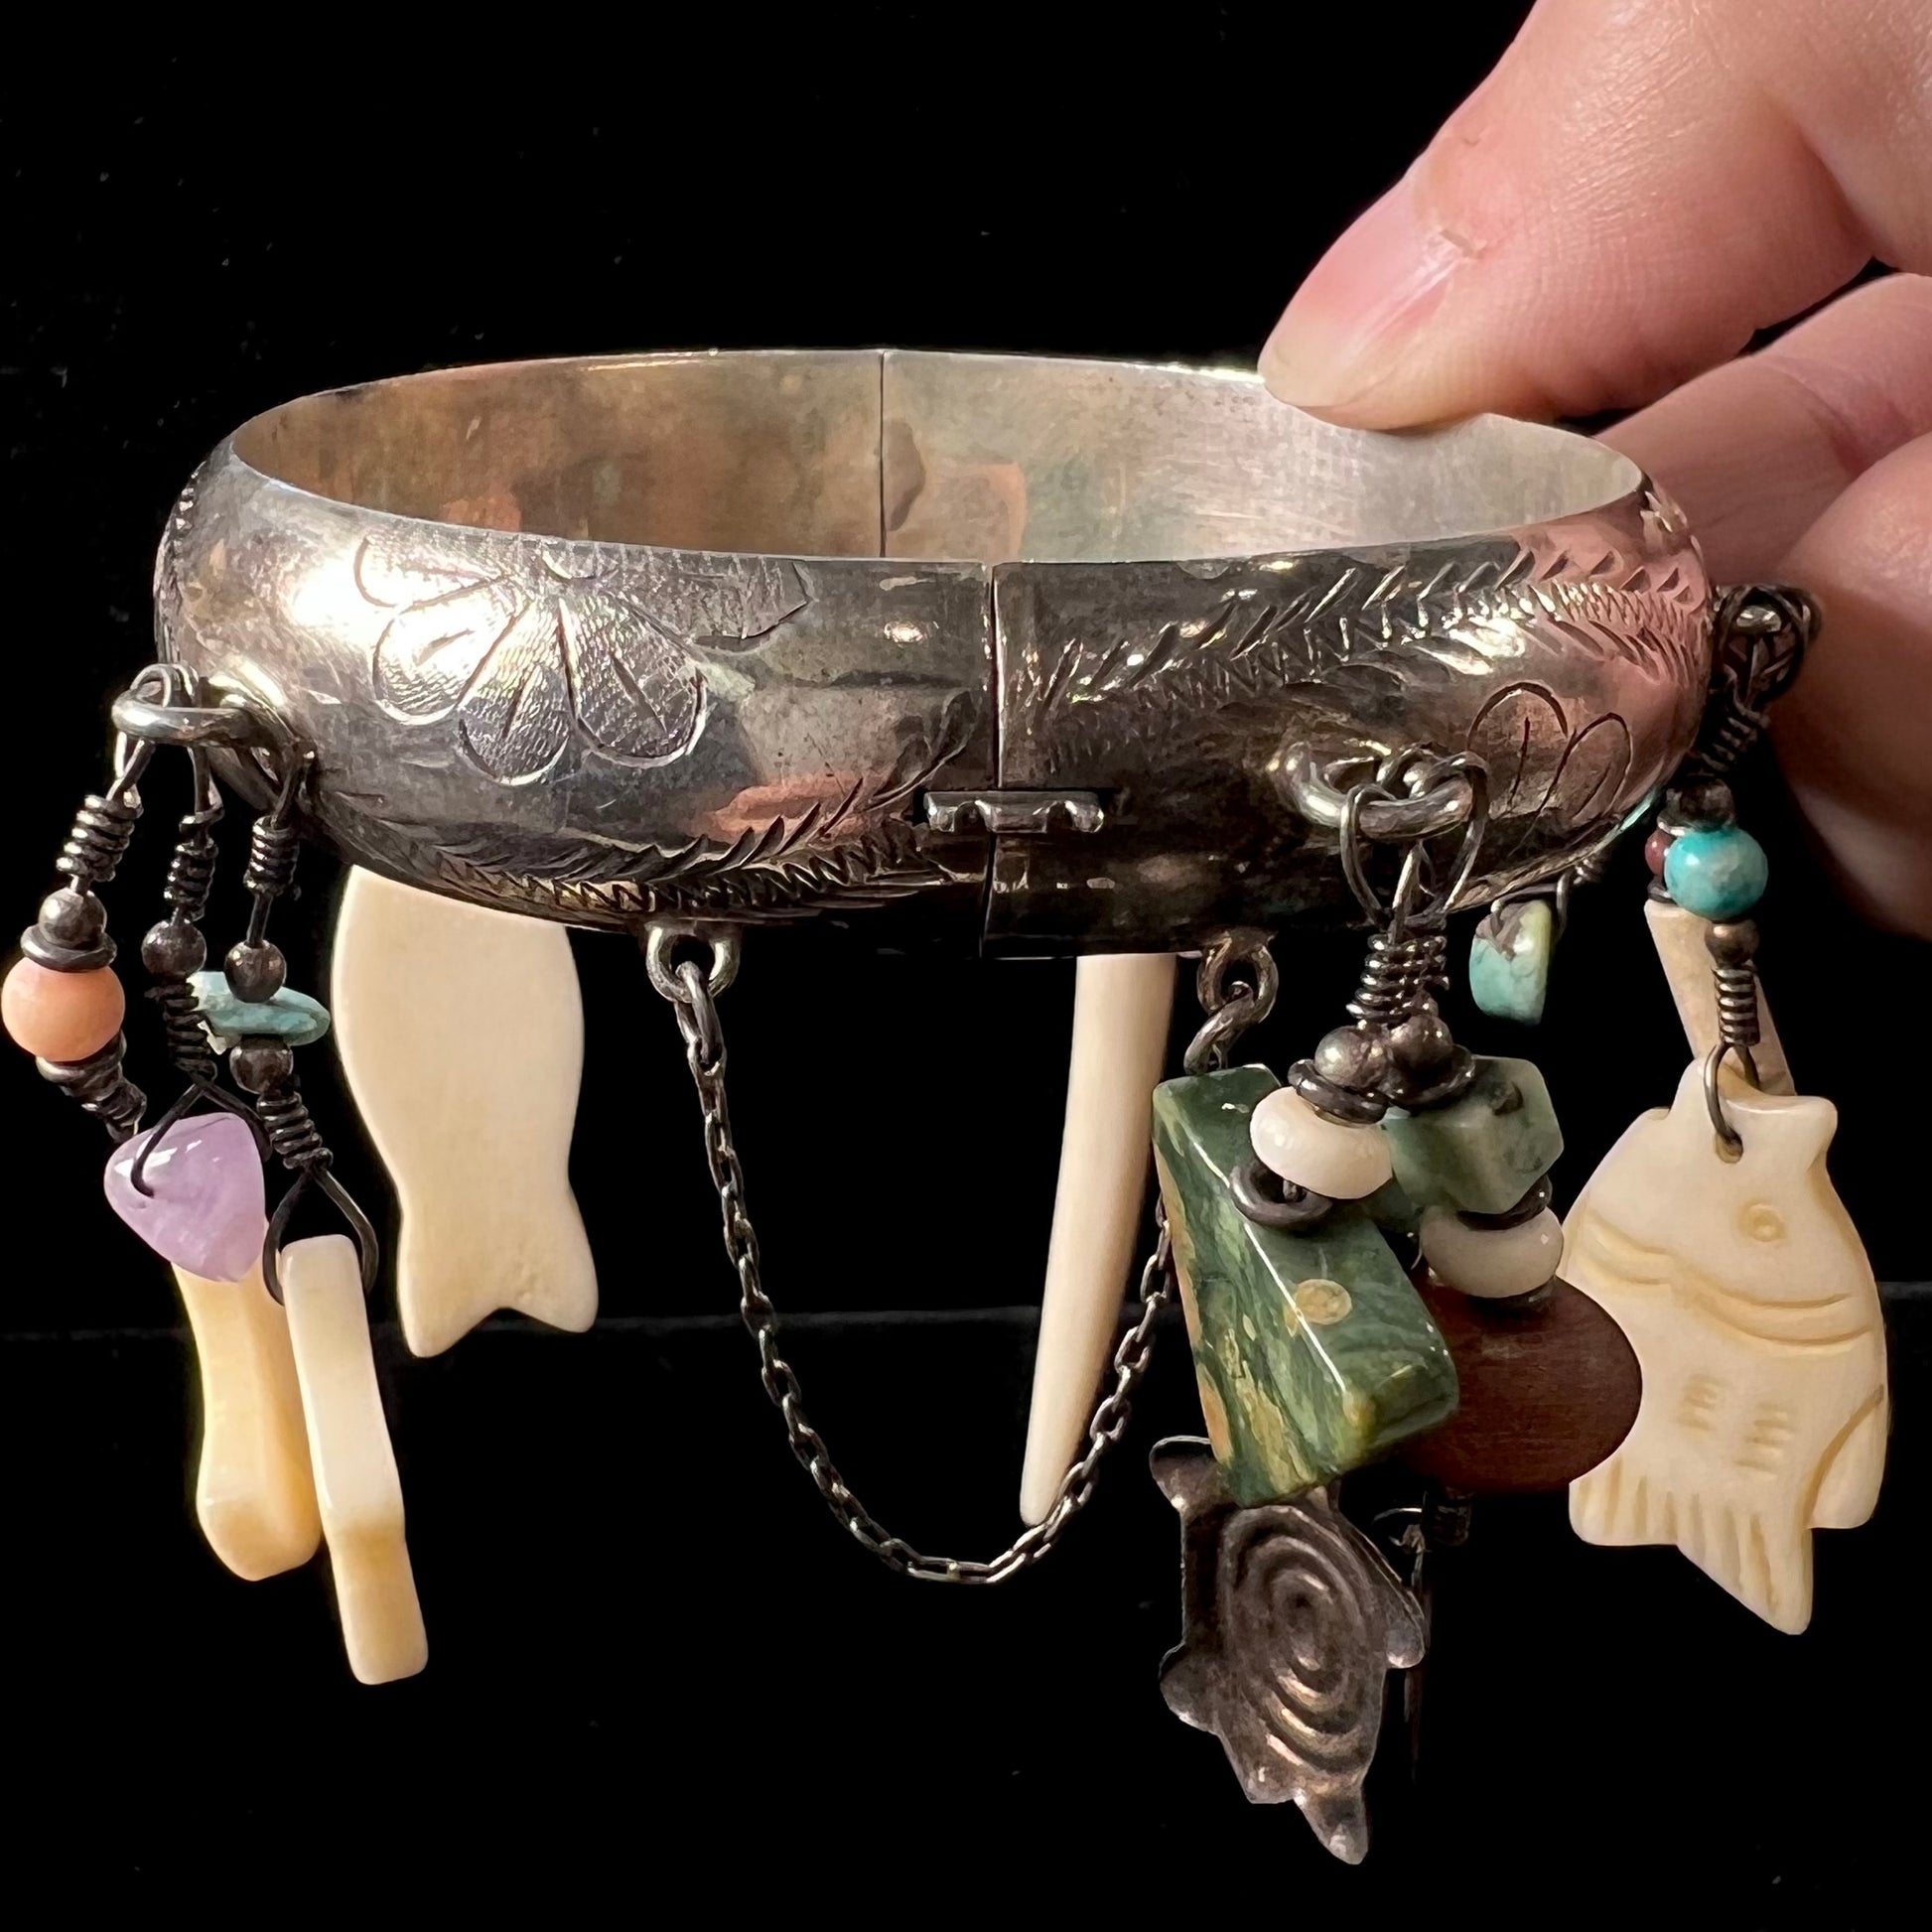 A Native American sterling silver bangle bracelets attached with carved bone, gemstone, and silver charm fetishes.